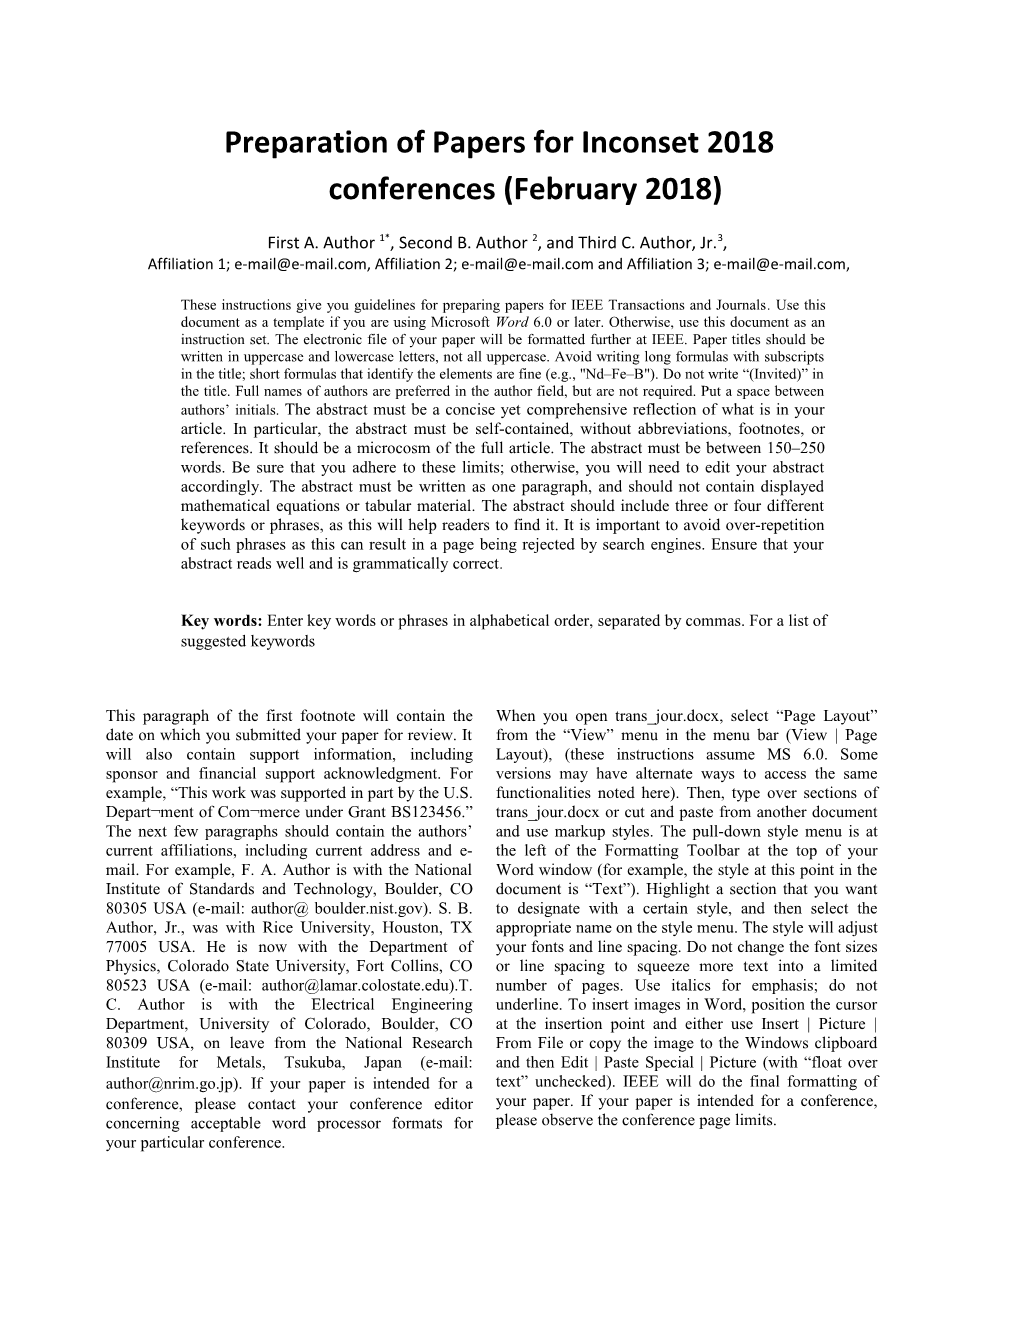 Preparation of Papers for Inconset 2018 Conferences (February 2018)